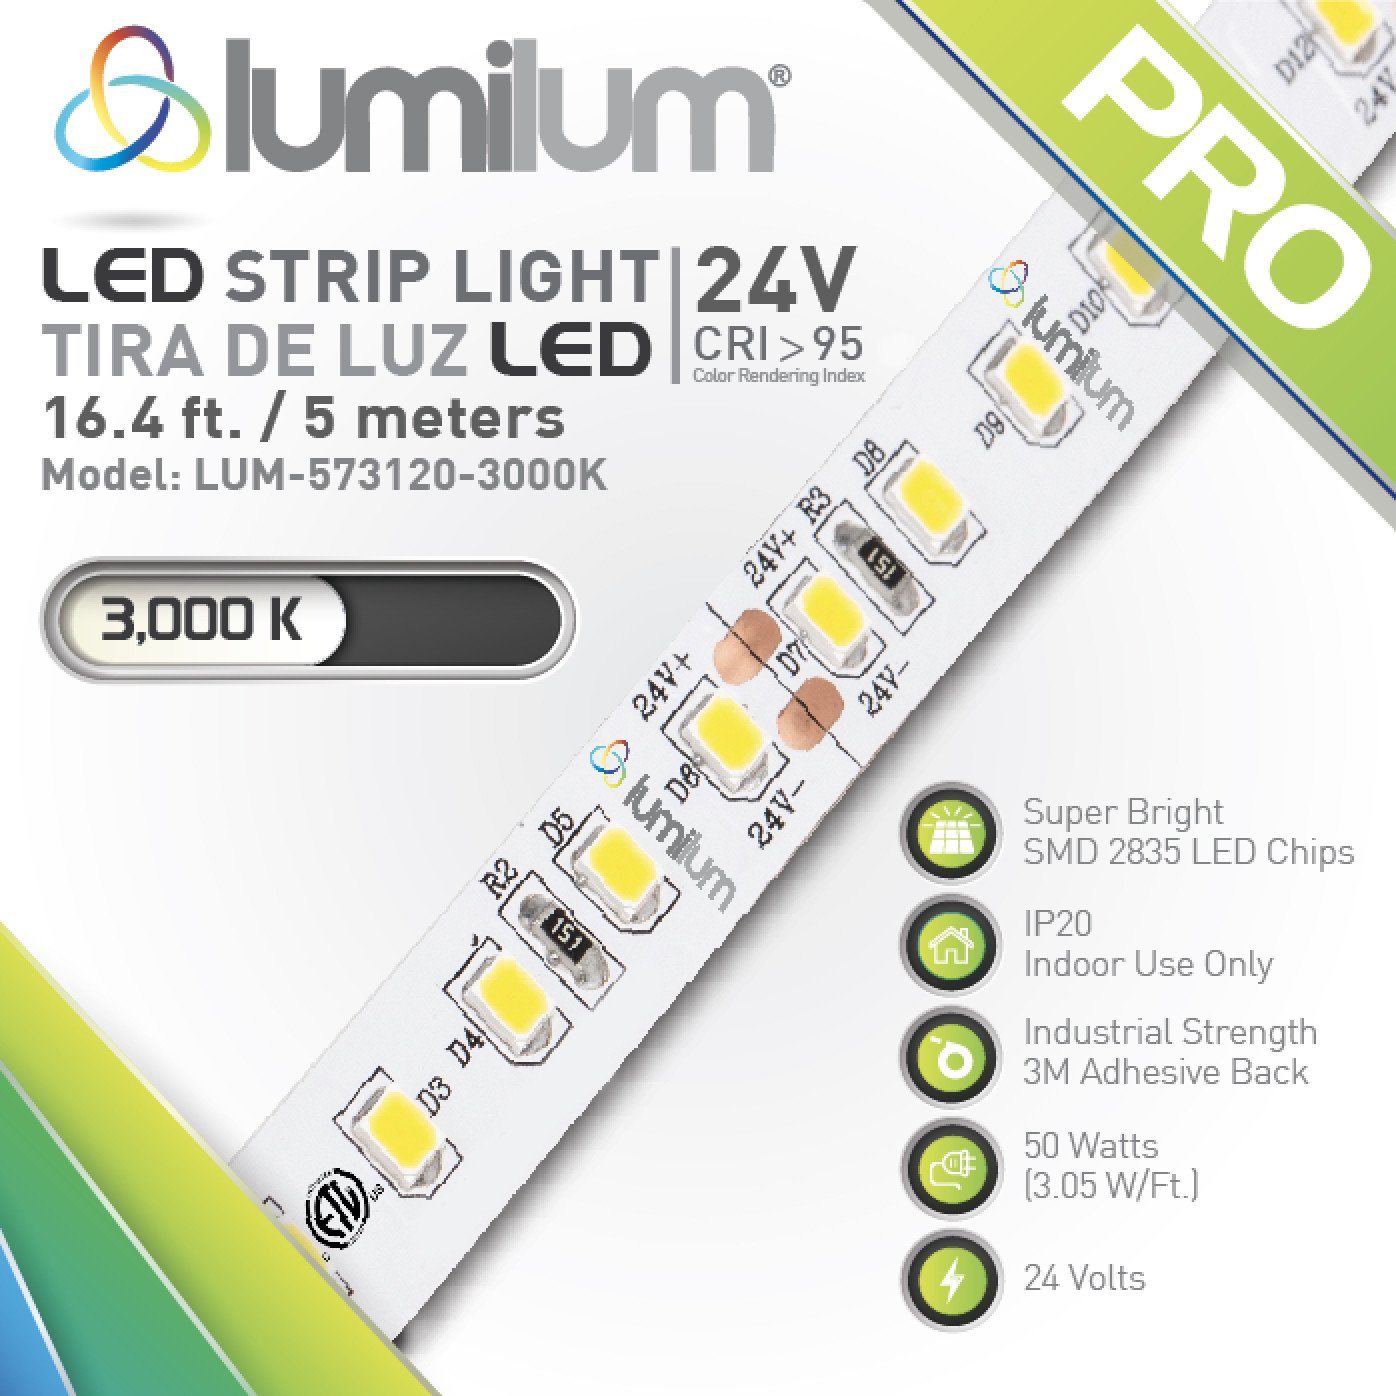 Load image into Gallery viewer, lumilum brand multicolored led strip light square packaging face with diagonal strip light with lime green PRO text and 3000k color temperature text
